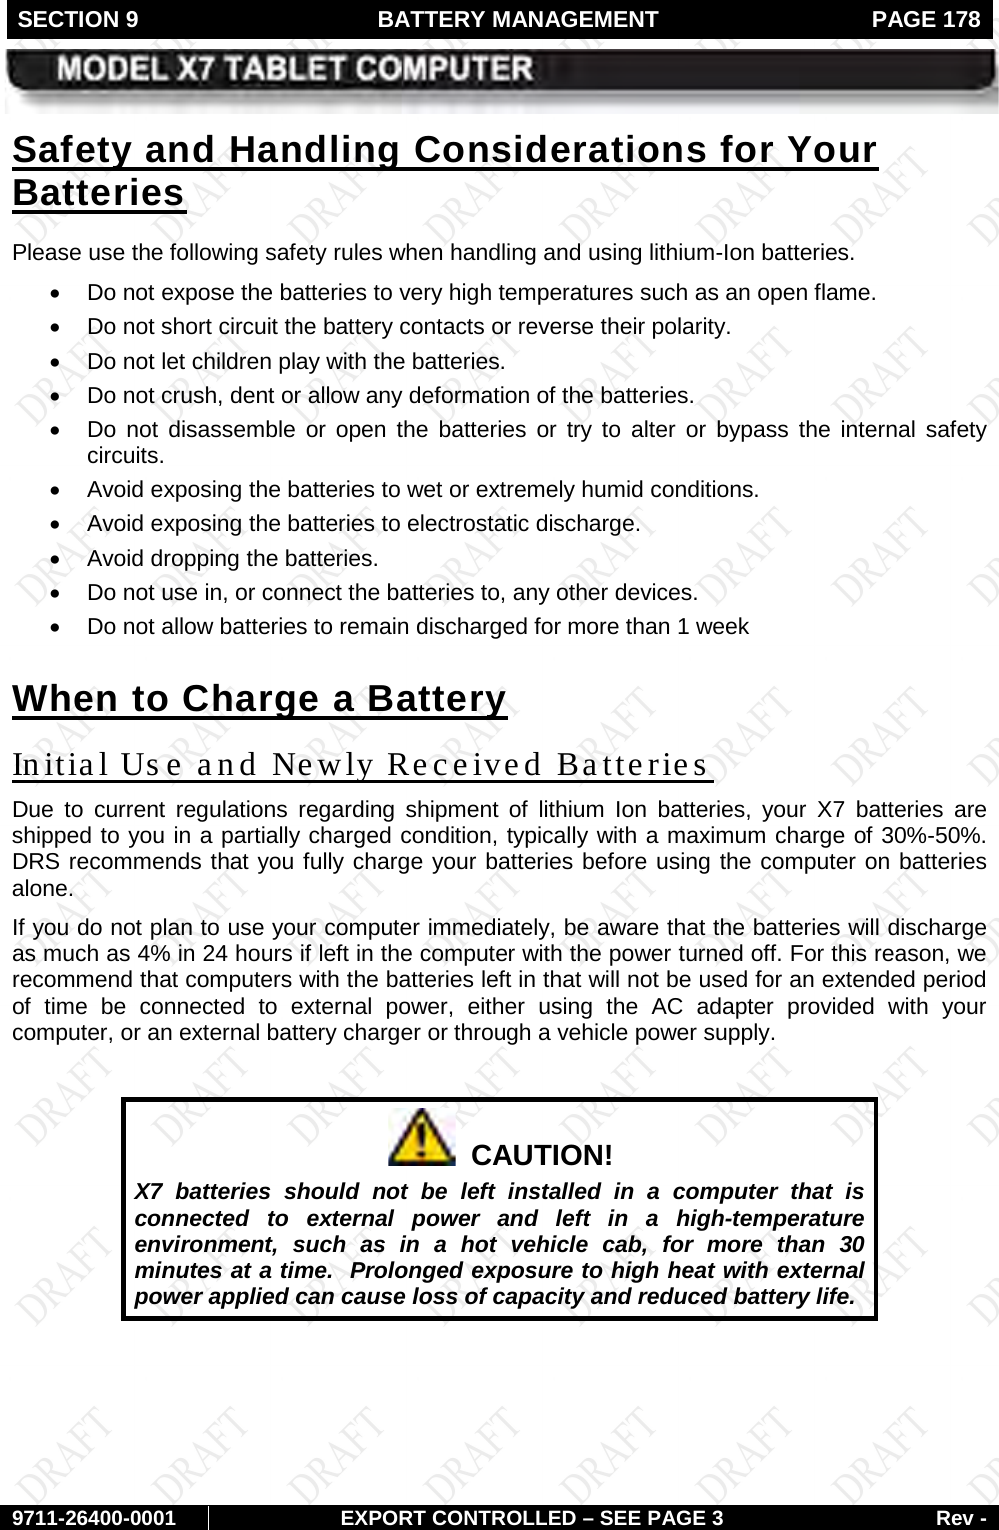 SECTION 9  BATTERY MANAGEMENT  PAGE 178        9711-26400-0001 EXPORT CONTROLLED – SEE PAGE 3 Rev - Please use the following safety rules when handling and using lithium-Ion batteries. Safety and Handling Considerations for Your Batteries • Do not expose the batteries to very high temperatures such as an open flame.  • Do not short circuit the battery contacts or reverse their polarity.  • Do not let children play with the batteries. • Do not crush, dent or allow any deformation of the batteries. • Do not disassemble or open the batteries or try to alter or bypass the internal safety circuits.  • Avoid exposing the batteries to wet or extremely humid conditions. • Avoid exposing the batteries to electrostatic discharge. • Avoid dropping the batteries. • Do not use in, or connect the batteries to, any other devices.  • Do not allow batteries to remain discharged for more than 1 week When to Charge a Battery Due to current regulations regarding shipment of lithium Ion batteries, your X7 batteries are shipped to you in a partially charged condition, typically with a maximum charge of 30%-50%. DRS recommends that you fully charge your batteries before using the computer on batteries alone.  Initial Us e and Newly Received Batteries If you do not plan to use your computer immediately, be aware that the batteries will discharge as much as 4% in 24 hours if left in the computer with the power turned off. For this reason, we recommend that computers with the batteries left in that will not be used for an extended period of time be connected to external power, either using the AC adapter provided with your computer, or an external battery charger or through a vehicle power supply.    CAUTION! X7 batteries should not be left installed in a computer that is connected to external power and left in a high-temperature environment, such as in a hot vehicle cab, for more than 30 minutes at a time.  Prolonged exposure to high heat with external power applied can cause loss of capacity and reduced battery life.    